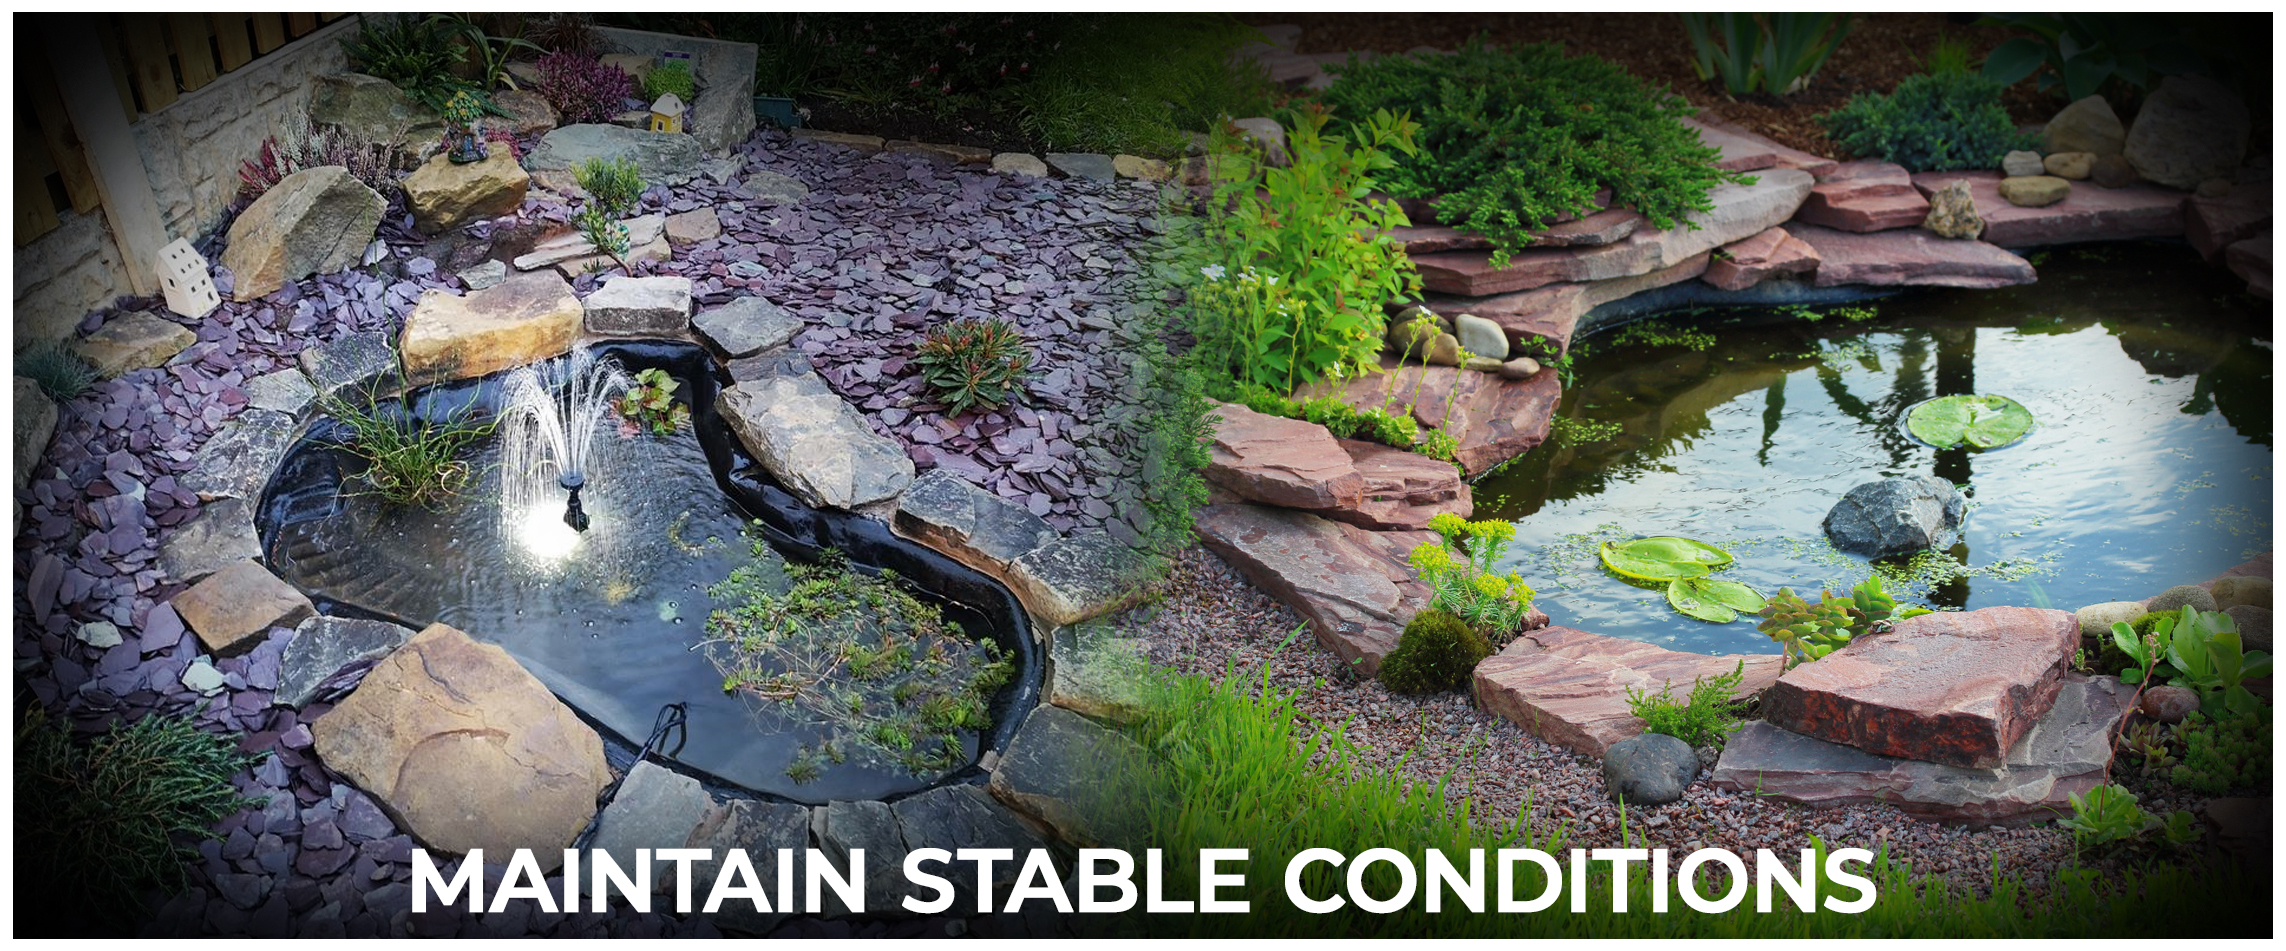  Maintain Stable Conditions